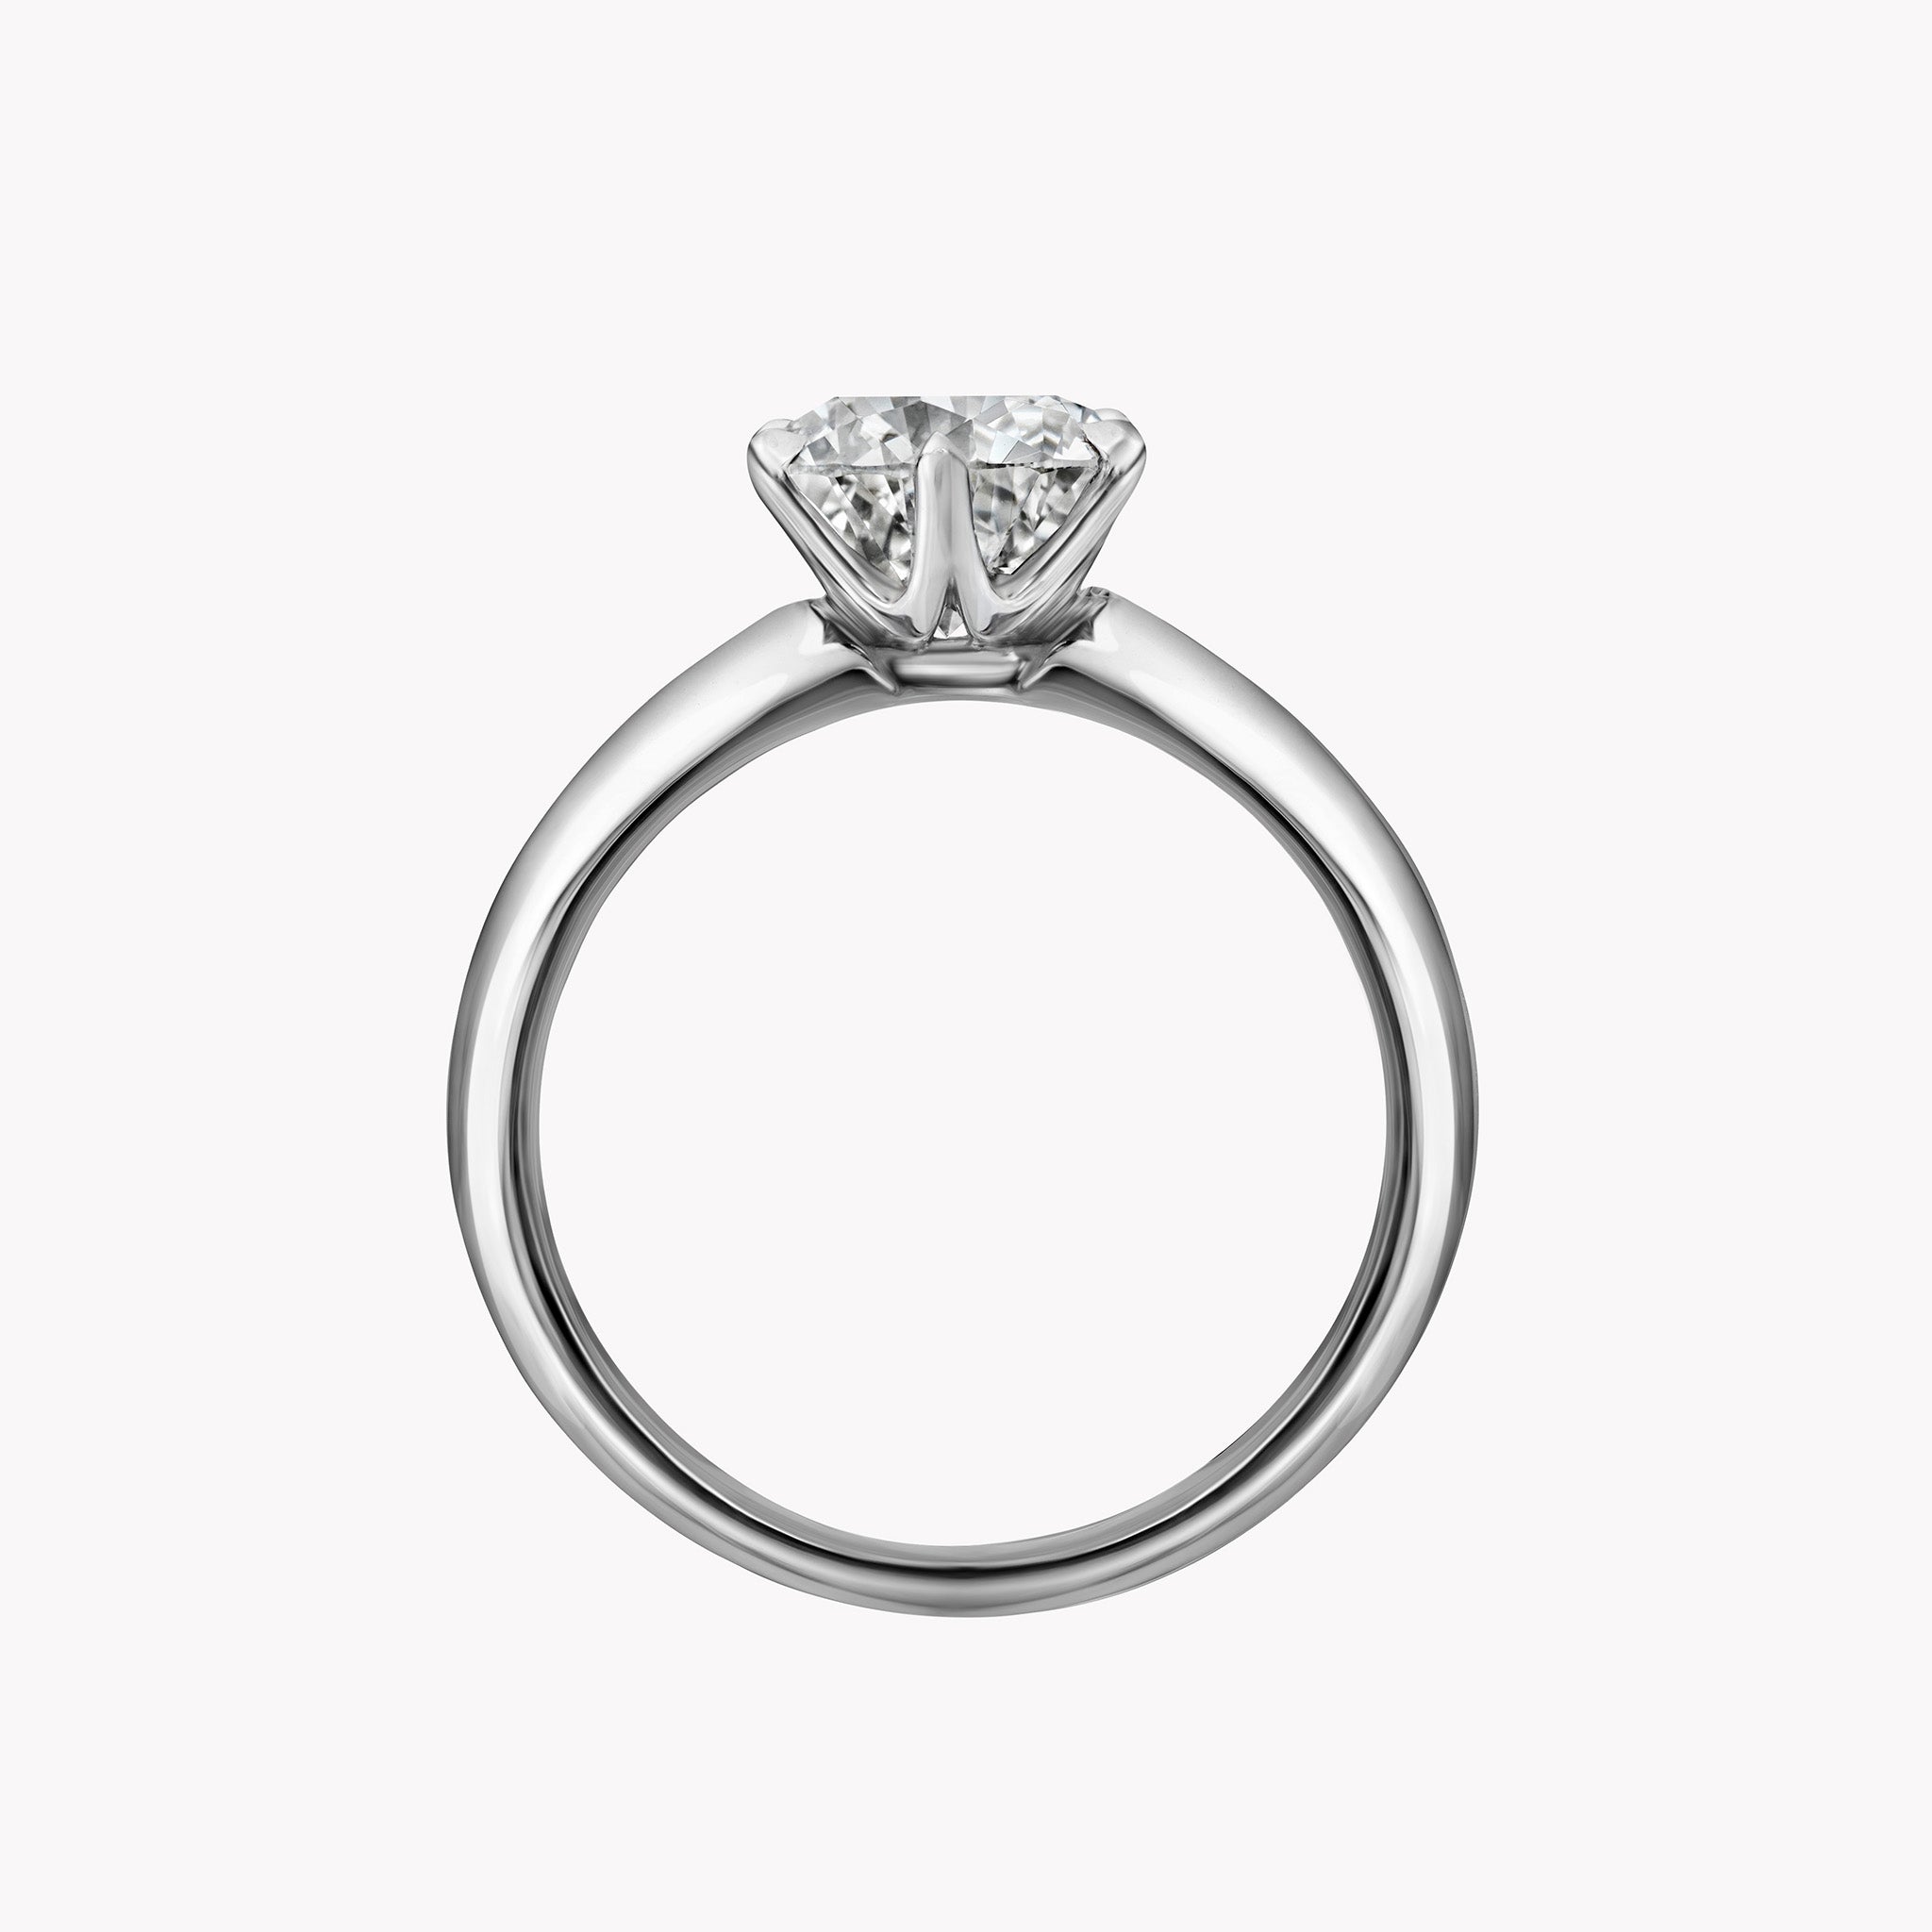 Round Brilliant Cut Solitaire Engagement Ring with Classic Knife Edge Setting